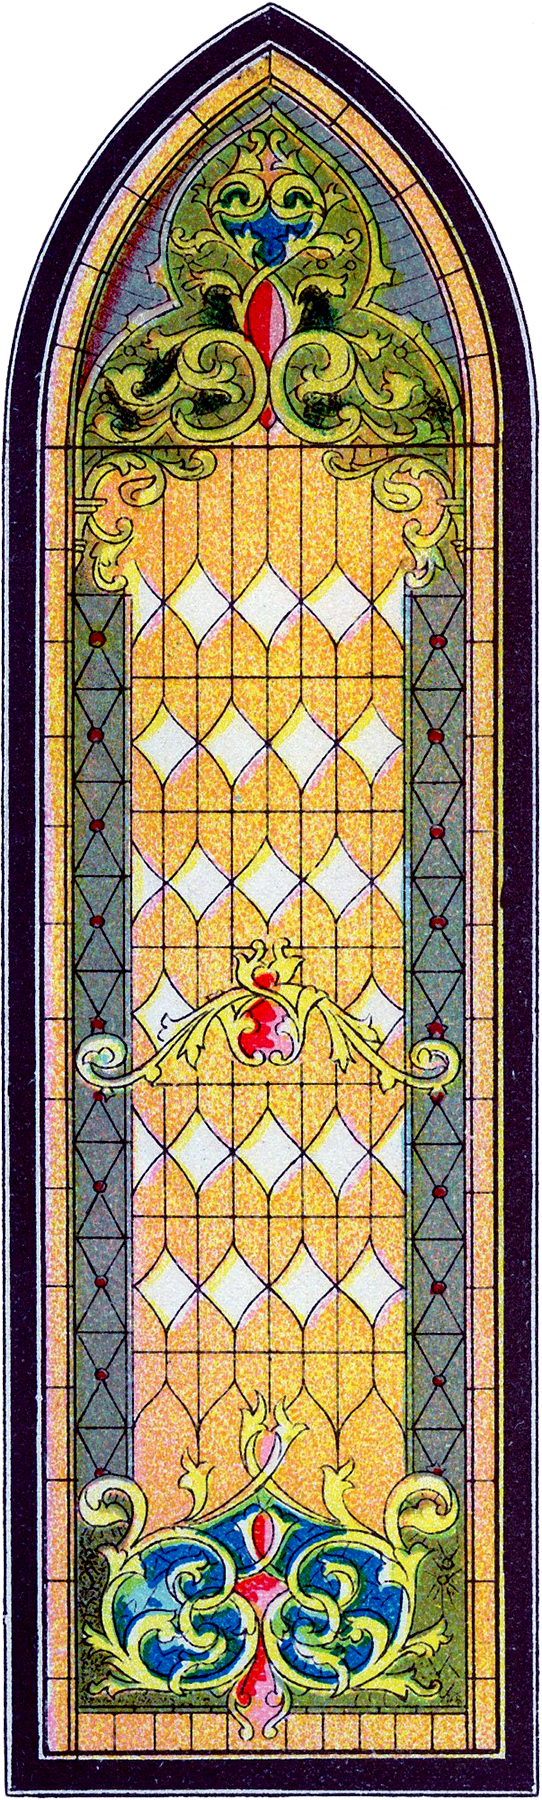 stained glass clipart - photo #44